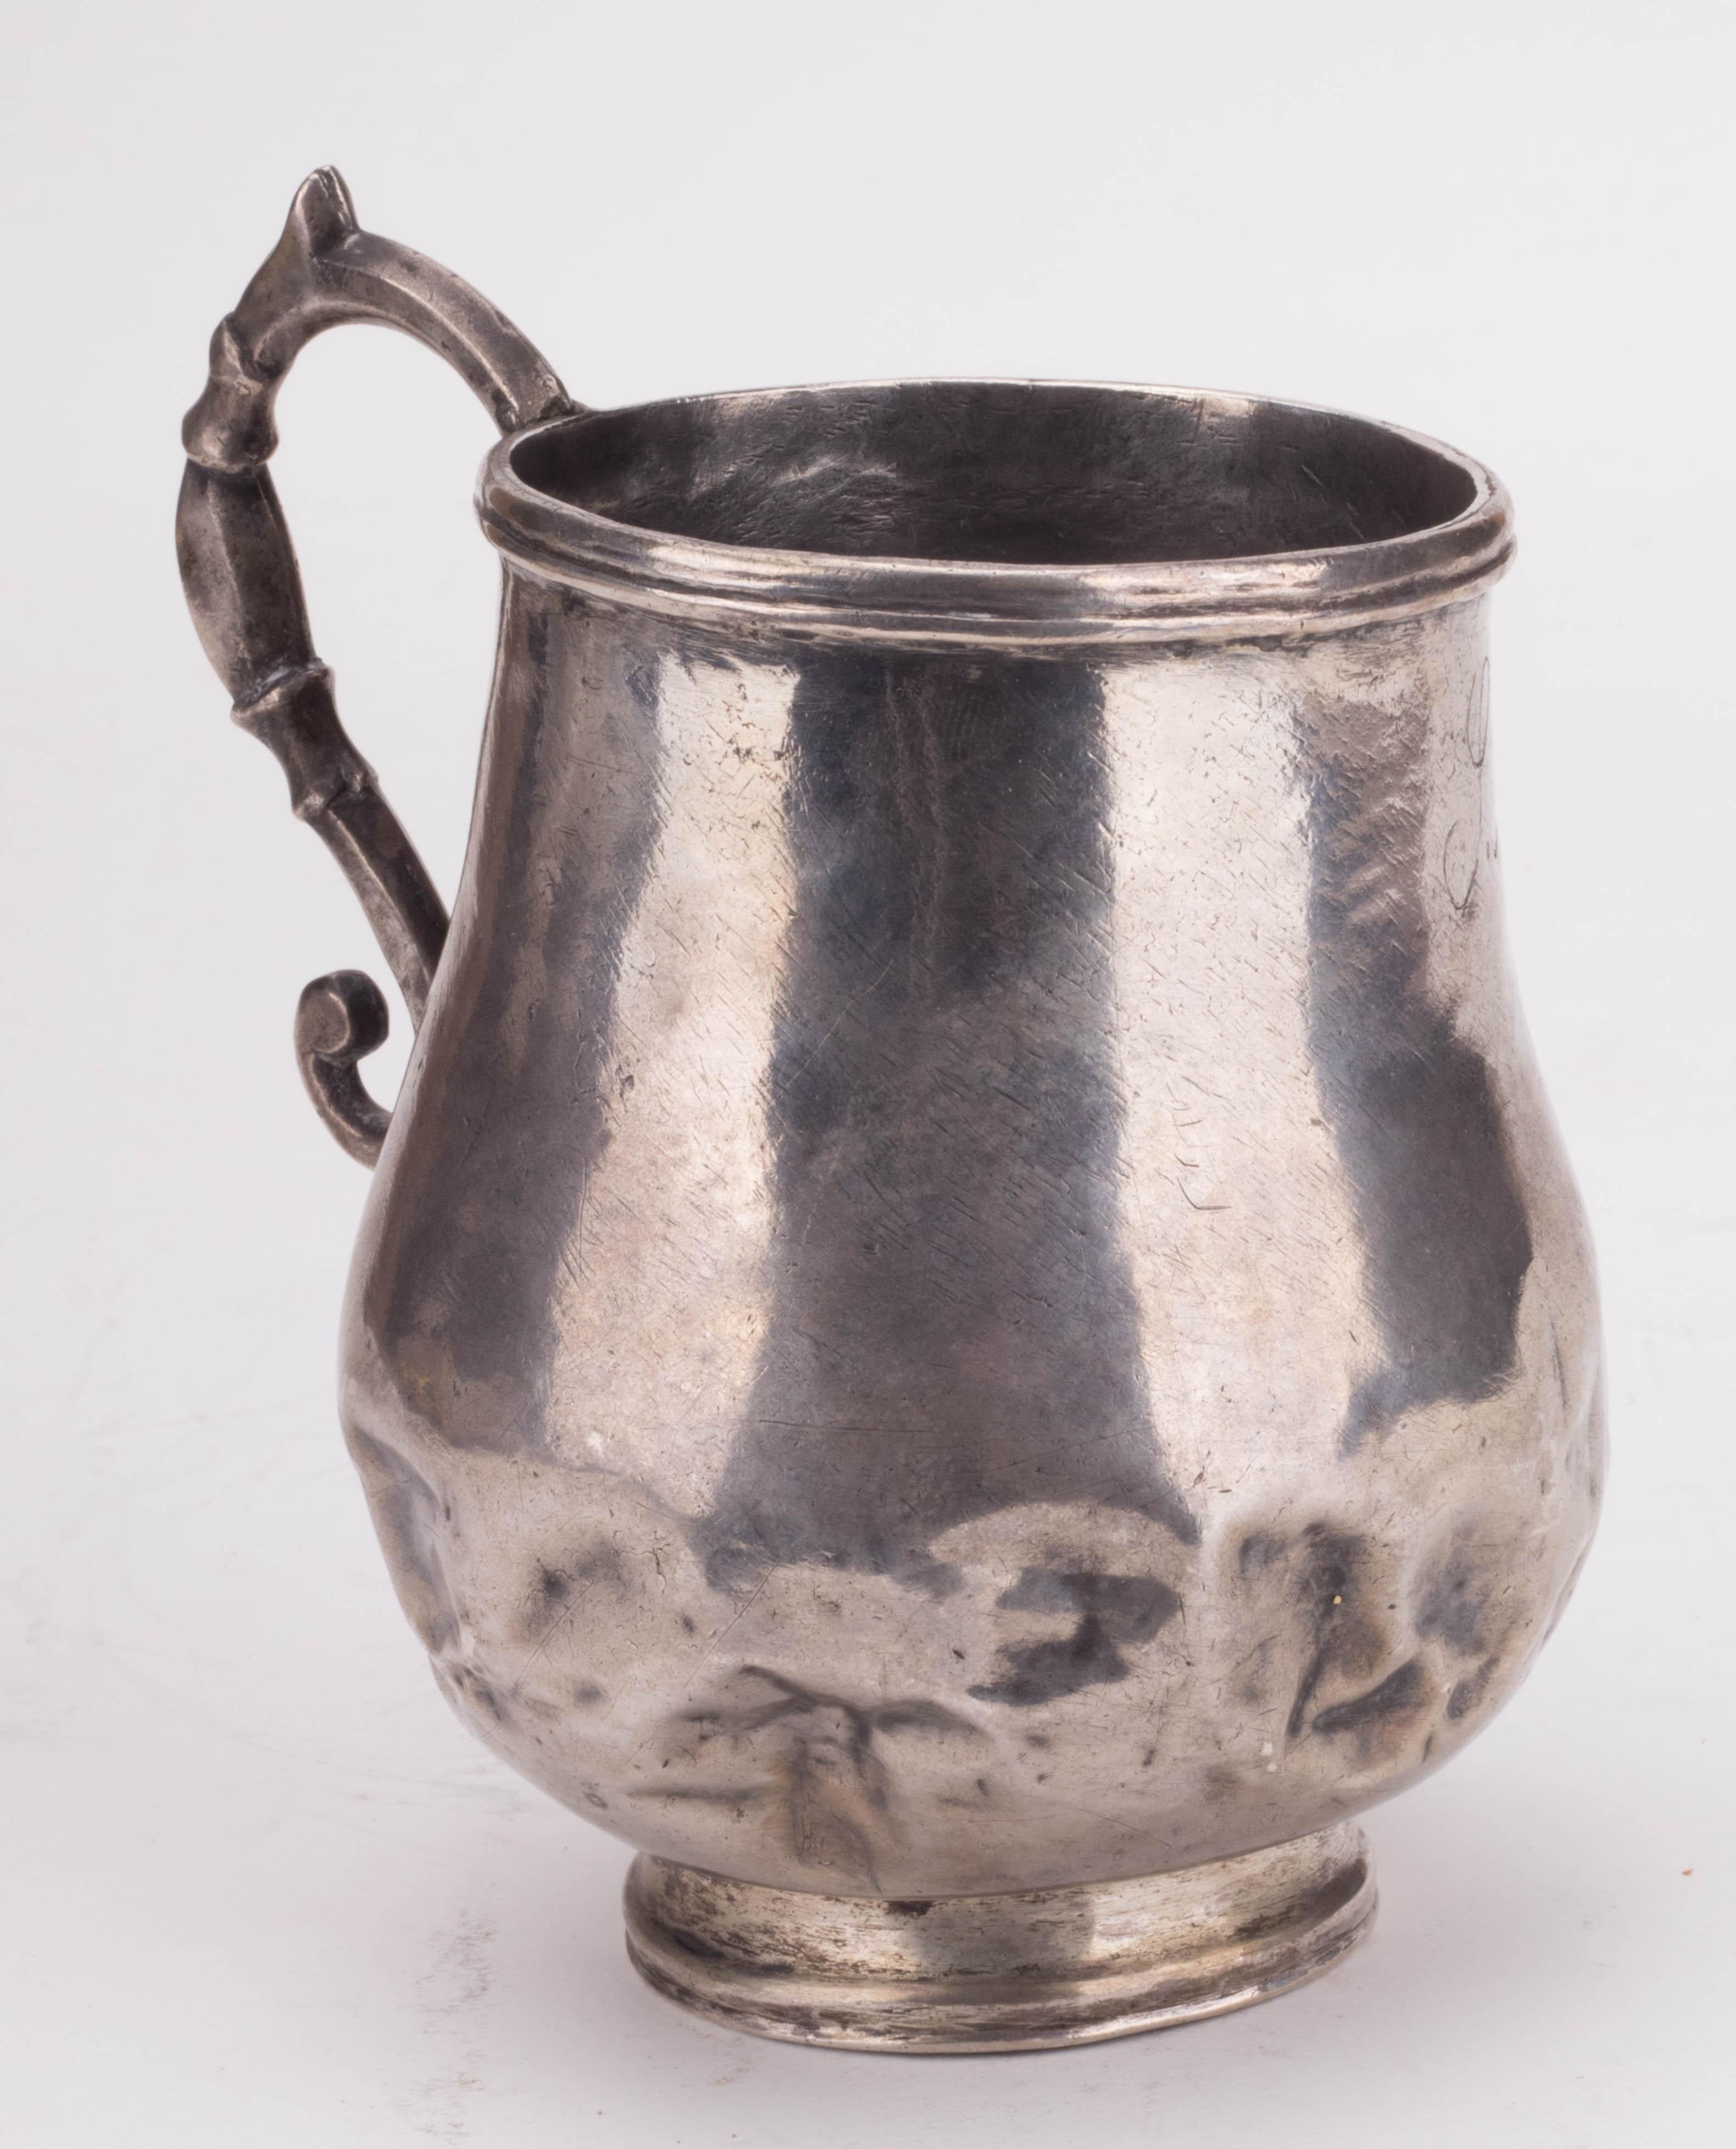 18th century colonial silver dented jug with engraved initials.

Silver by weight: 295g.